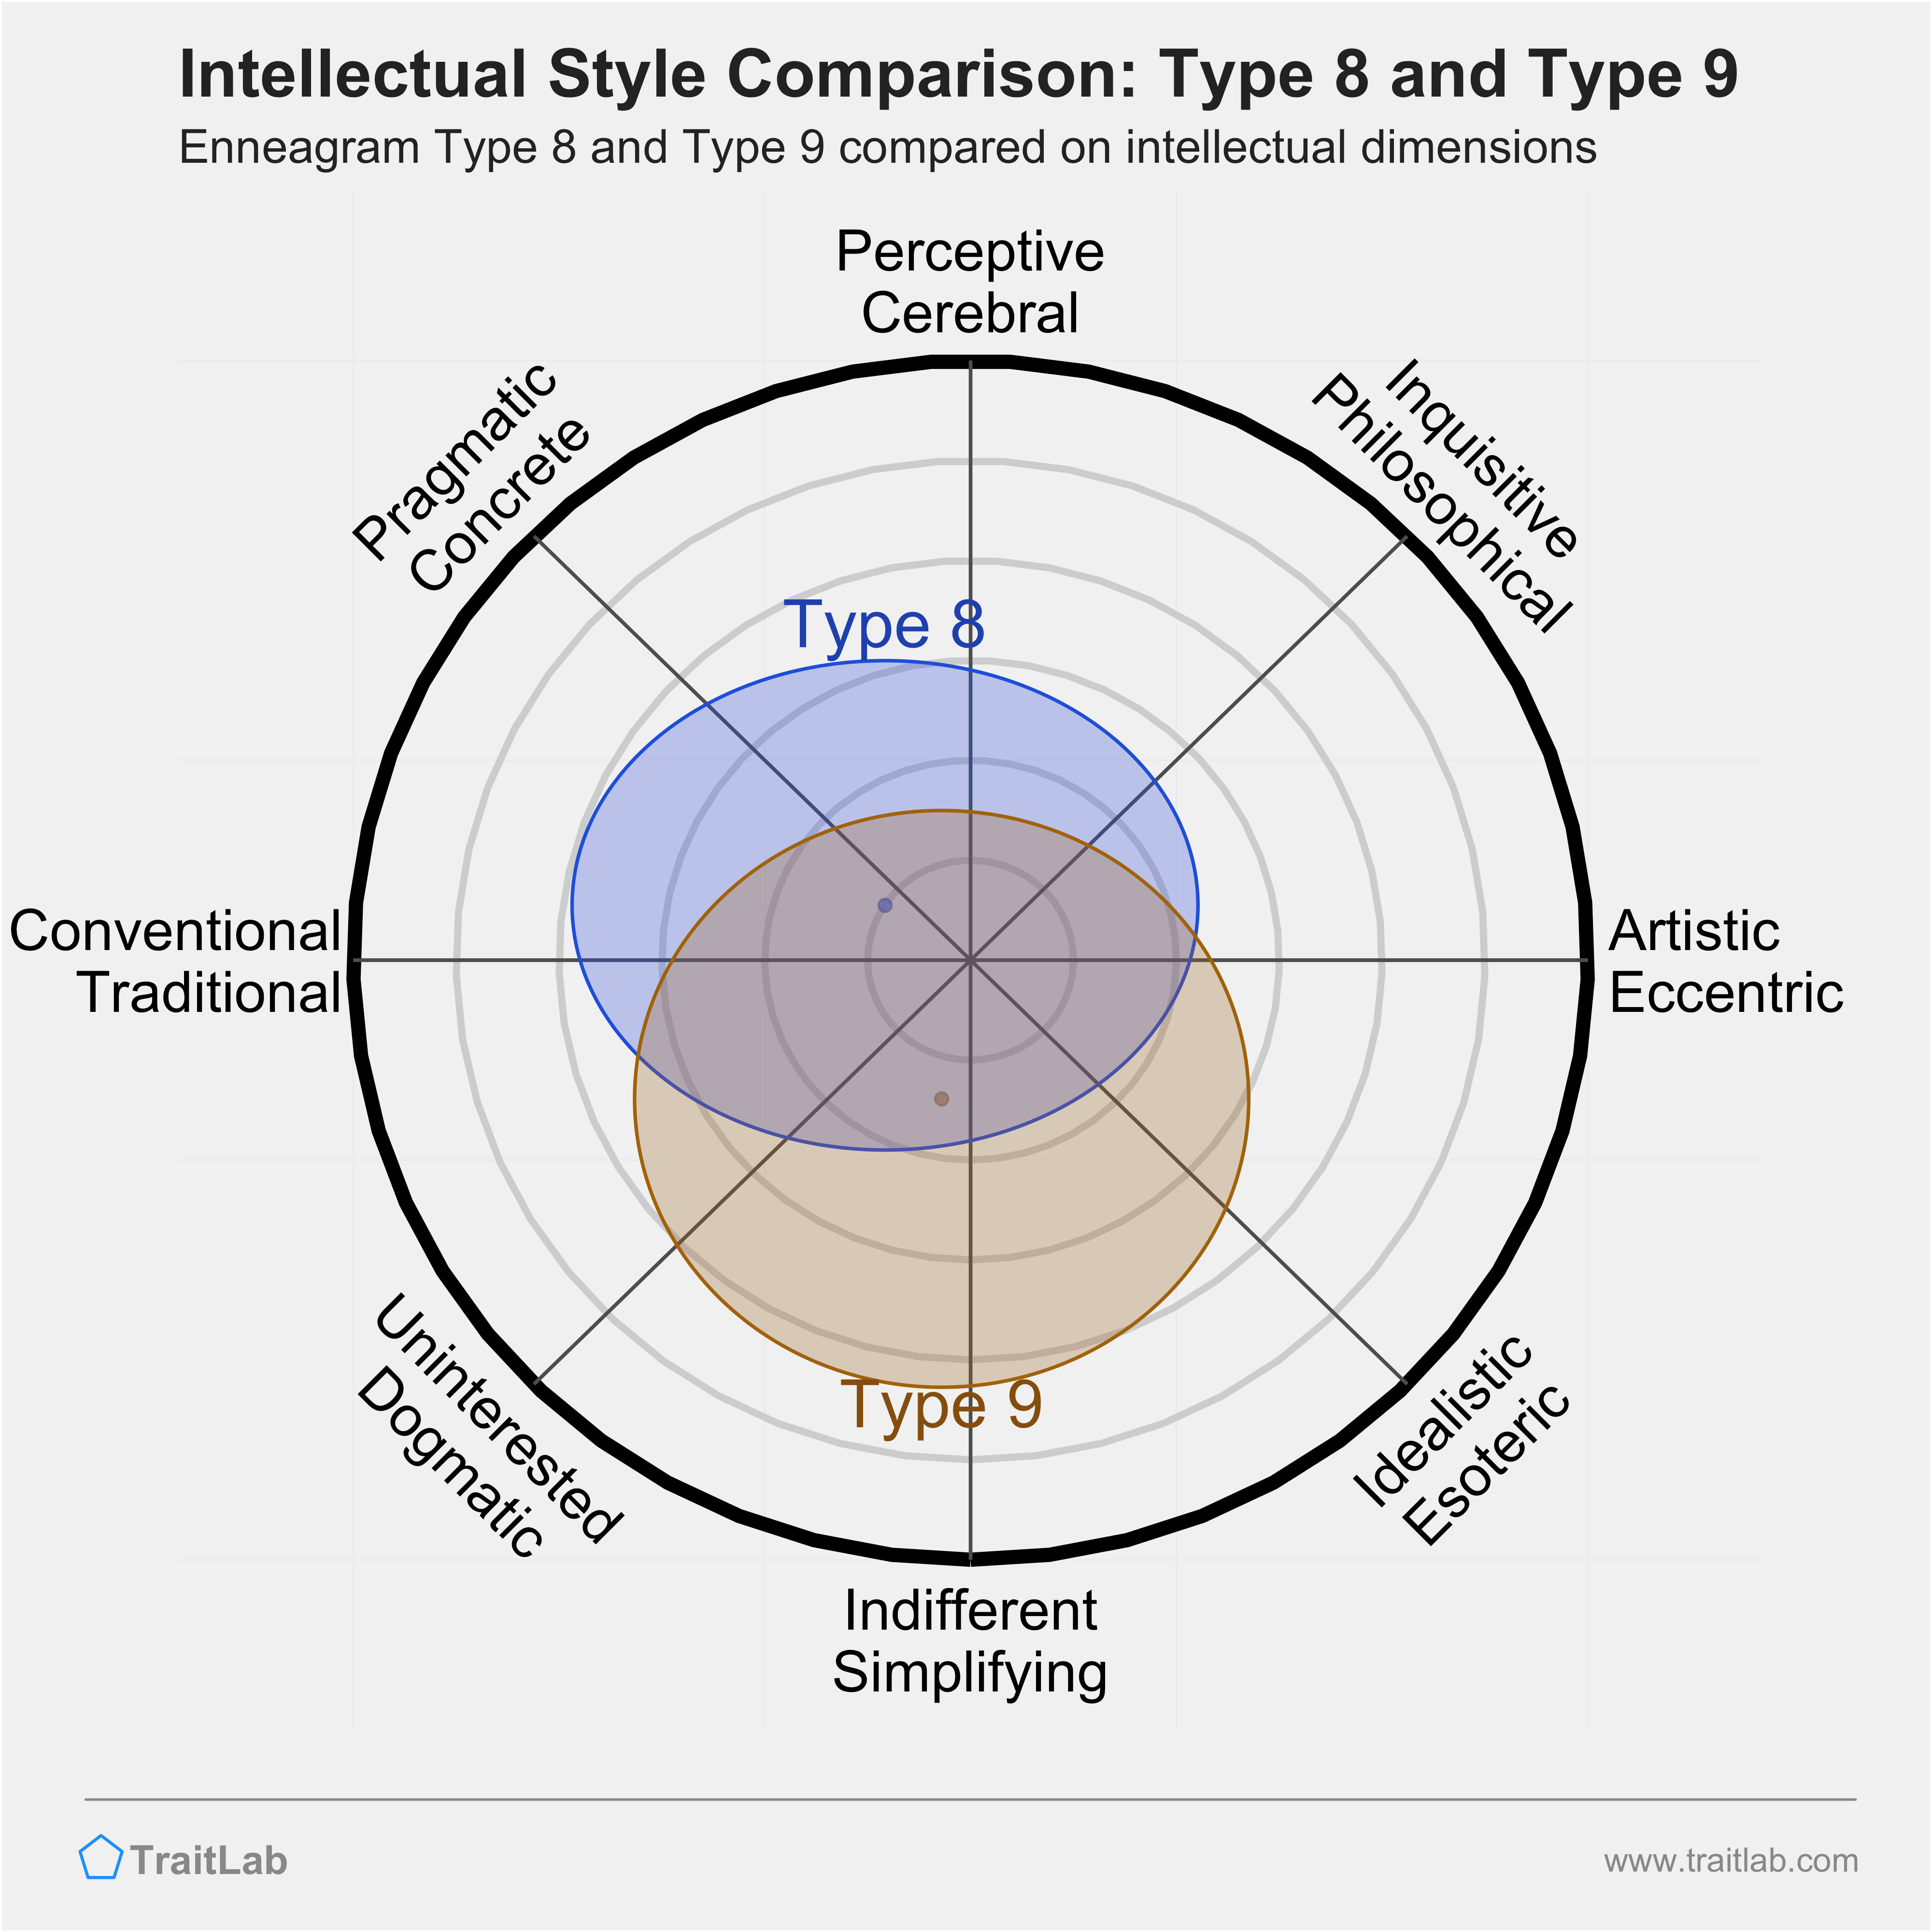 Type 8 and Type 9 comparison across intellectual dimensions